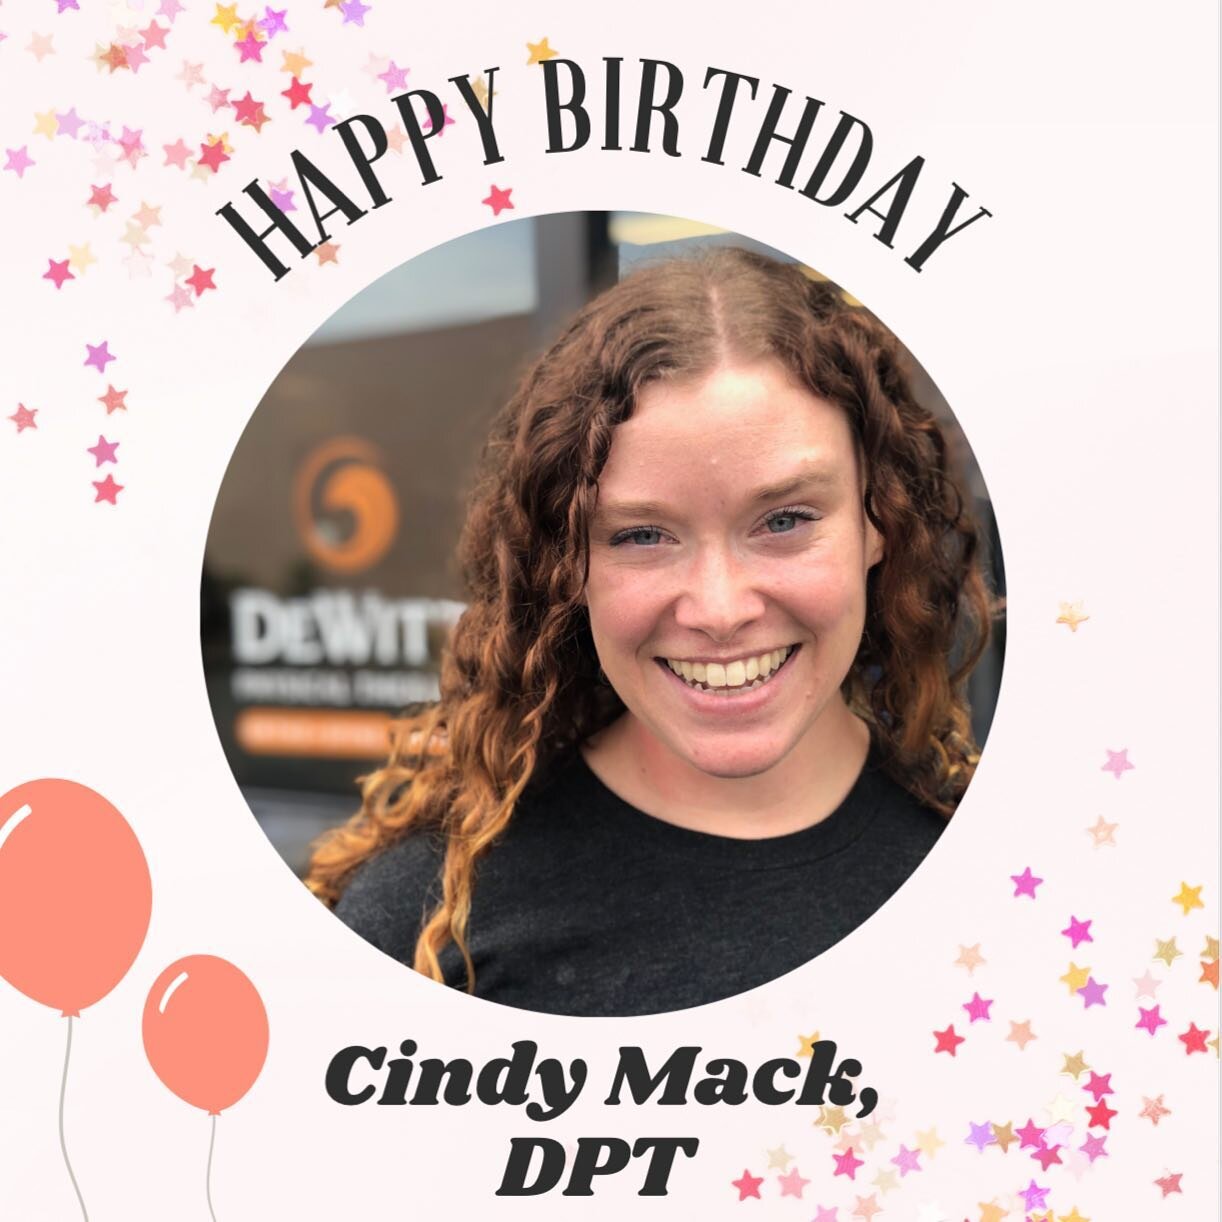 Happy, happy birthday Cindy Mack, DPT! 👏🏼🏋🏼&zwj;♀️🥾🌲

Thank you for all you do here and all the hard work you put in, we hope you have a great day! 💚🤘🏼